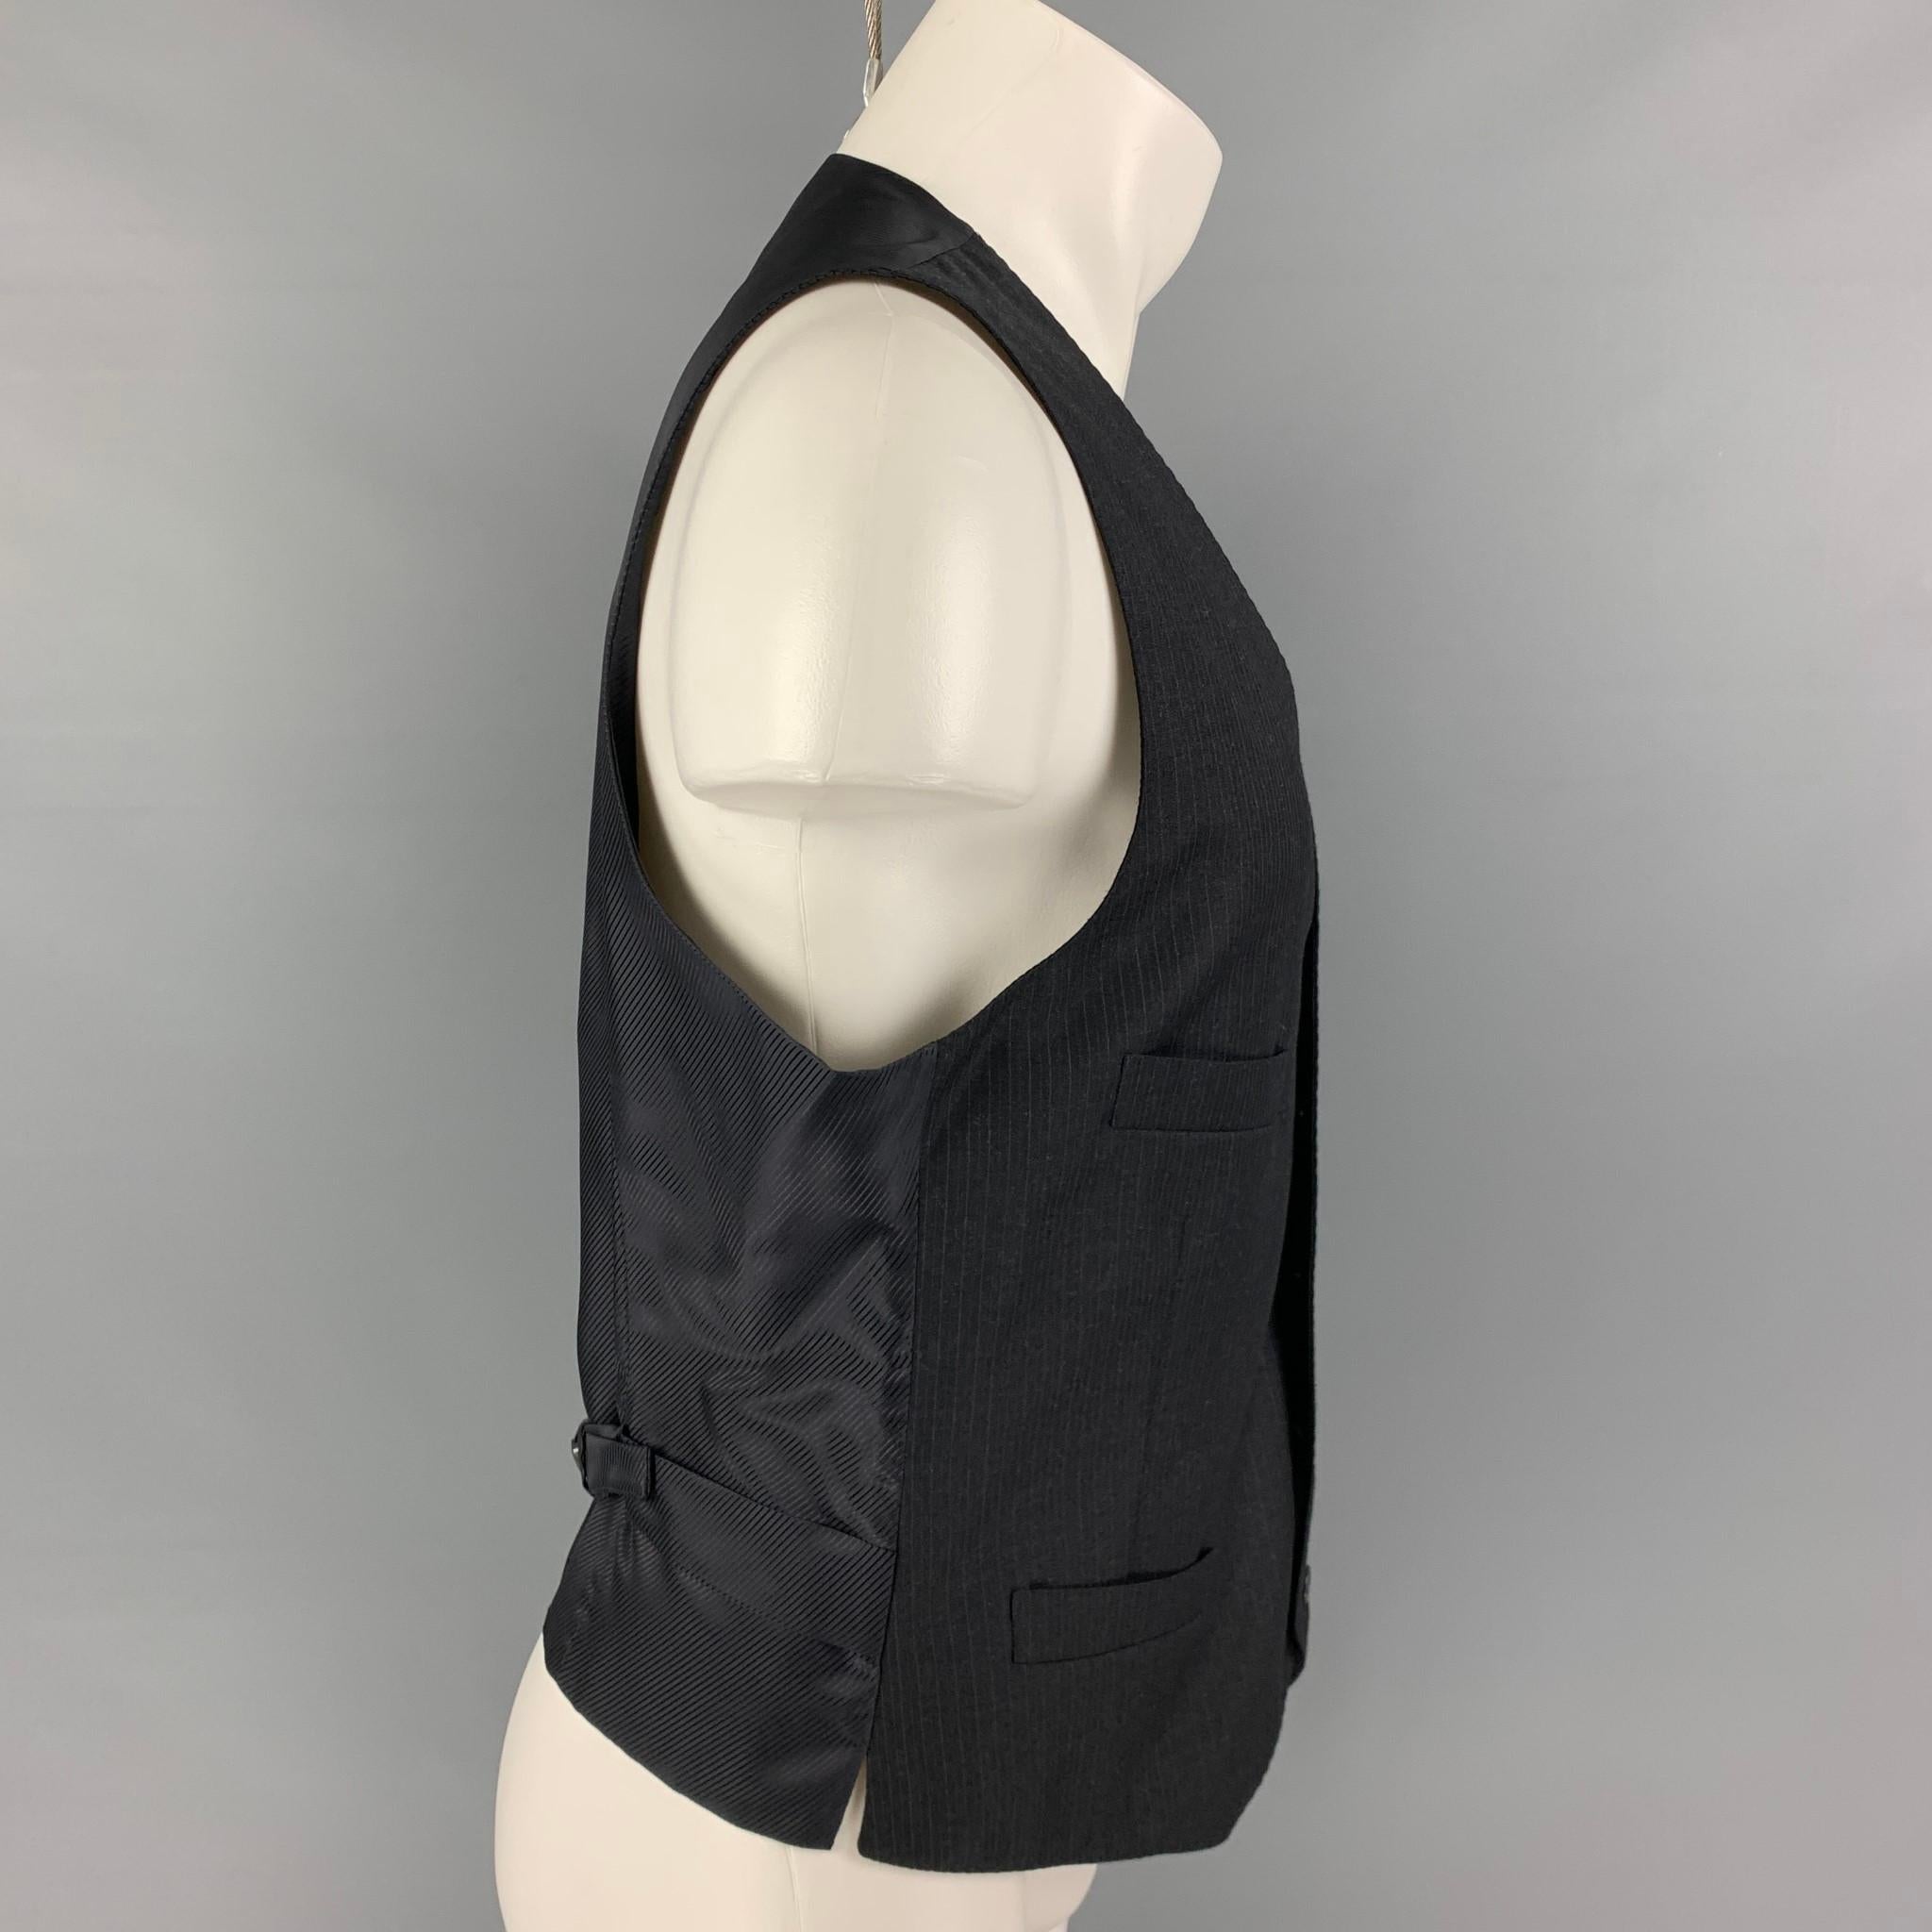 GIORGIO ARMANI vest comes in a charcoal pinstripe wool featuring a adjustable back, slit pockets, and a buttoned closure. Made in Italy. 

Excellent Pre-Owned Condition.
Marked: 52

Measurements:

Shoulder: 13.5 in.
Chest: 40 in.
Length: 22 in.